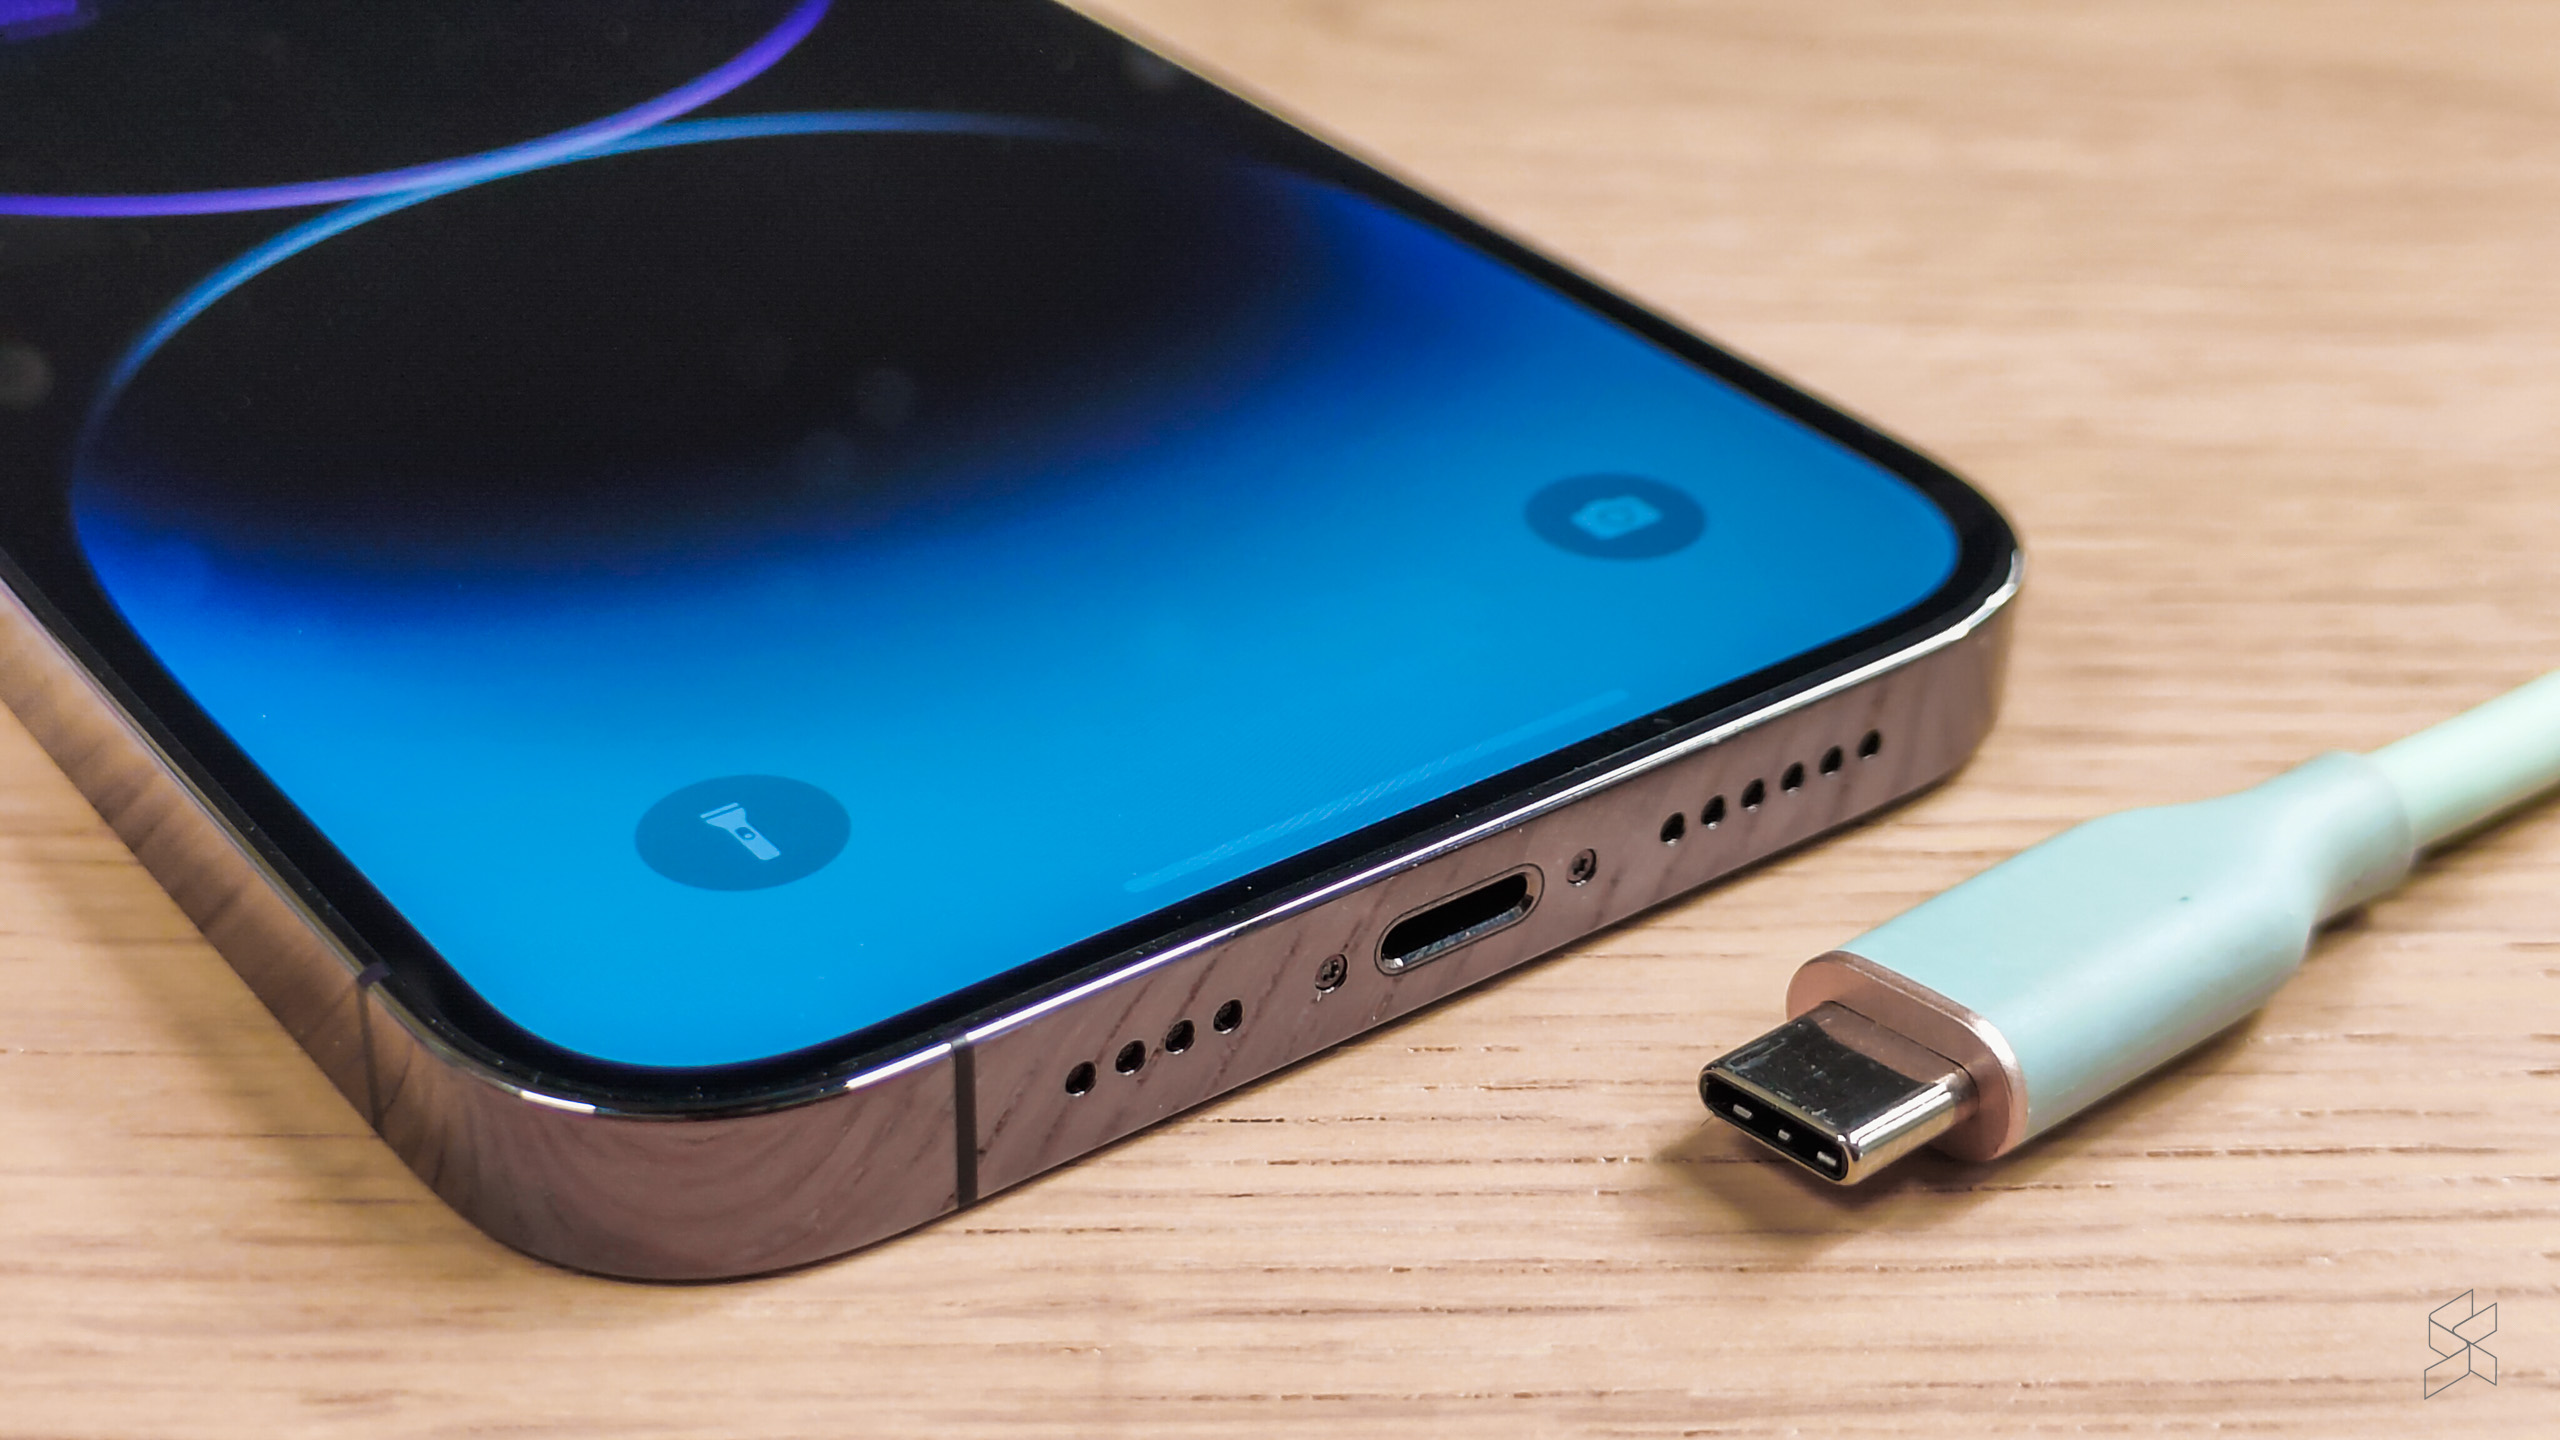 iPhones will be required to use USB-C charging by 2024 under EU policy